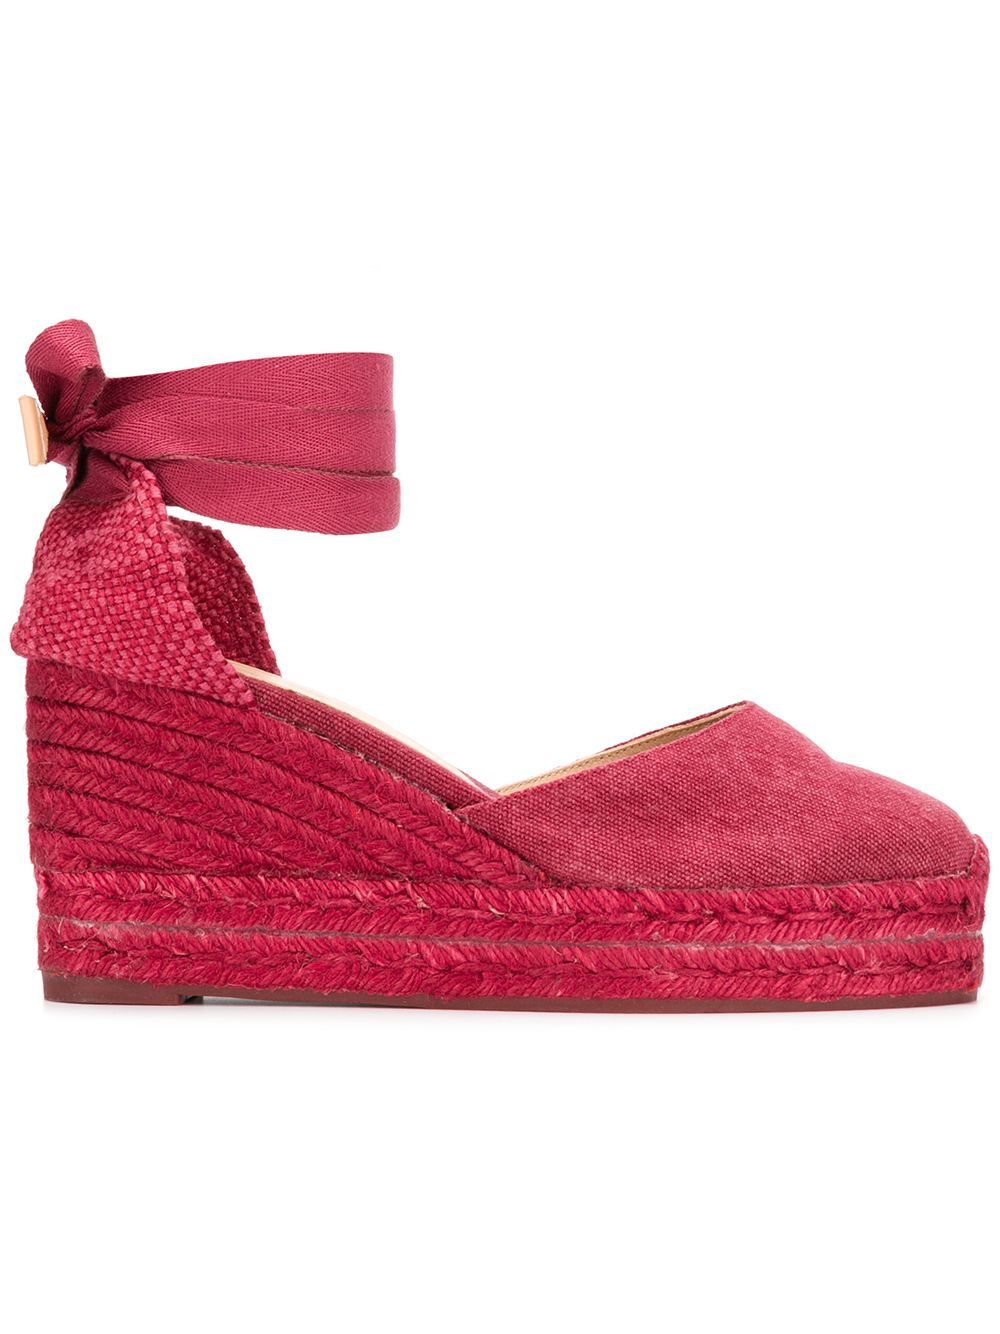 Castañer lace-up wedge espadrilles - Red | FarFetch US